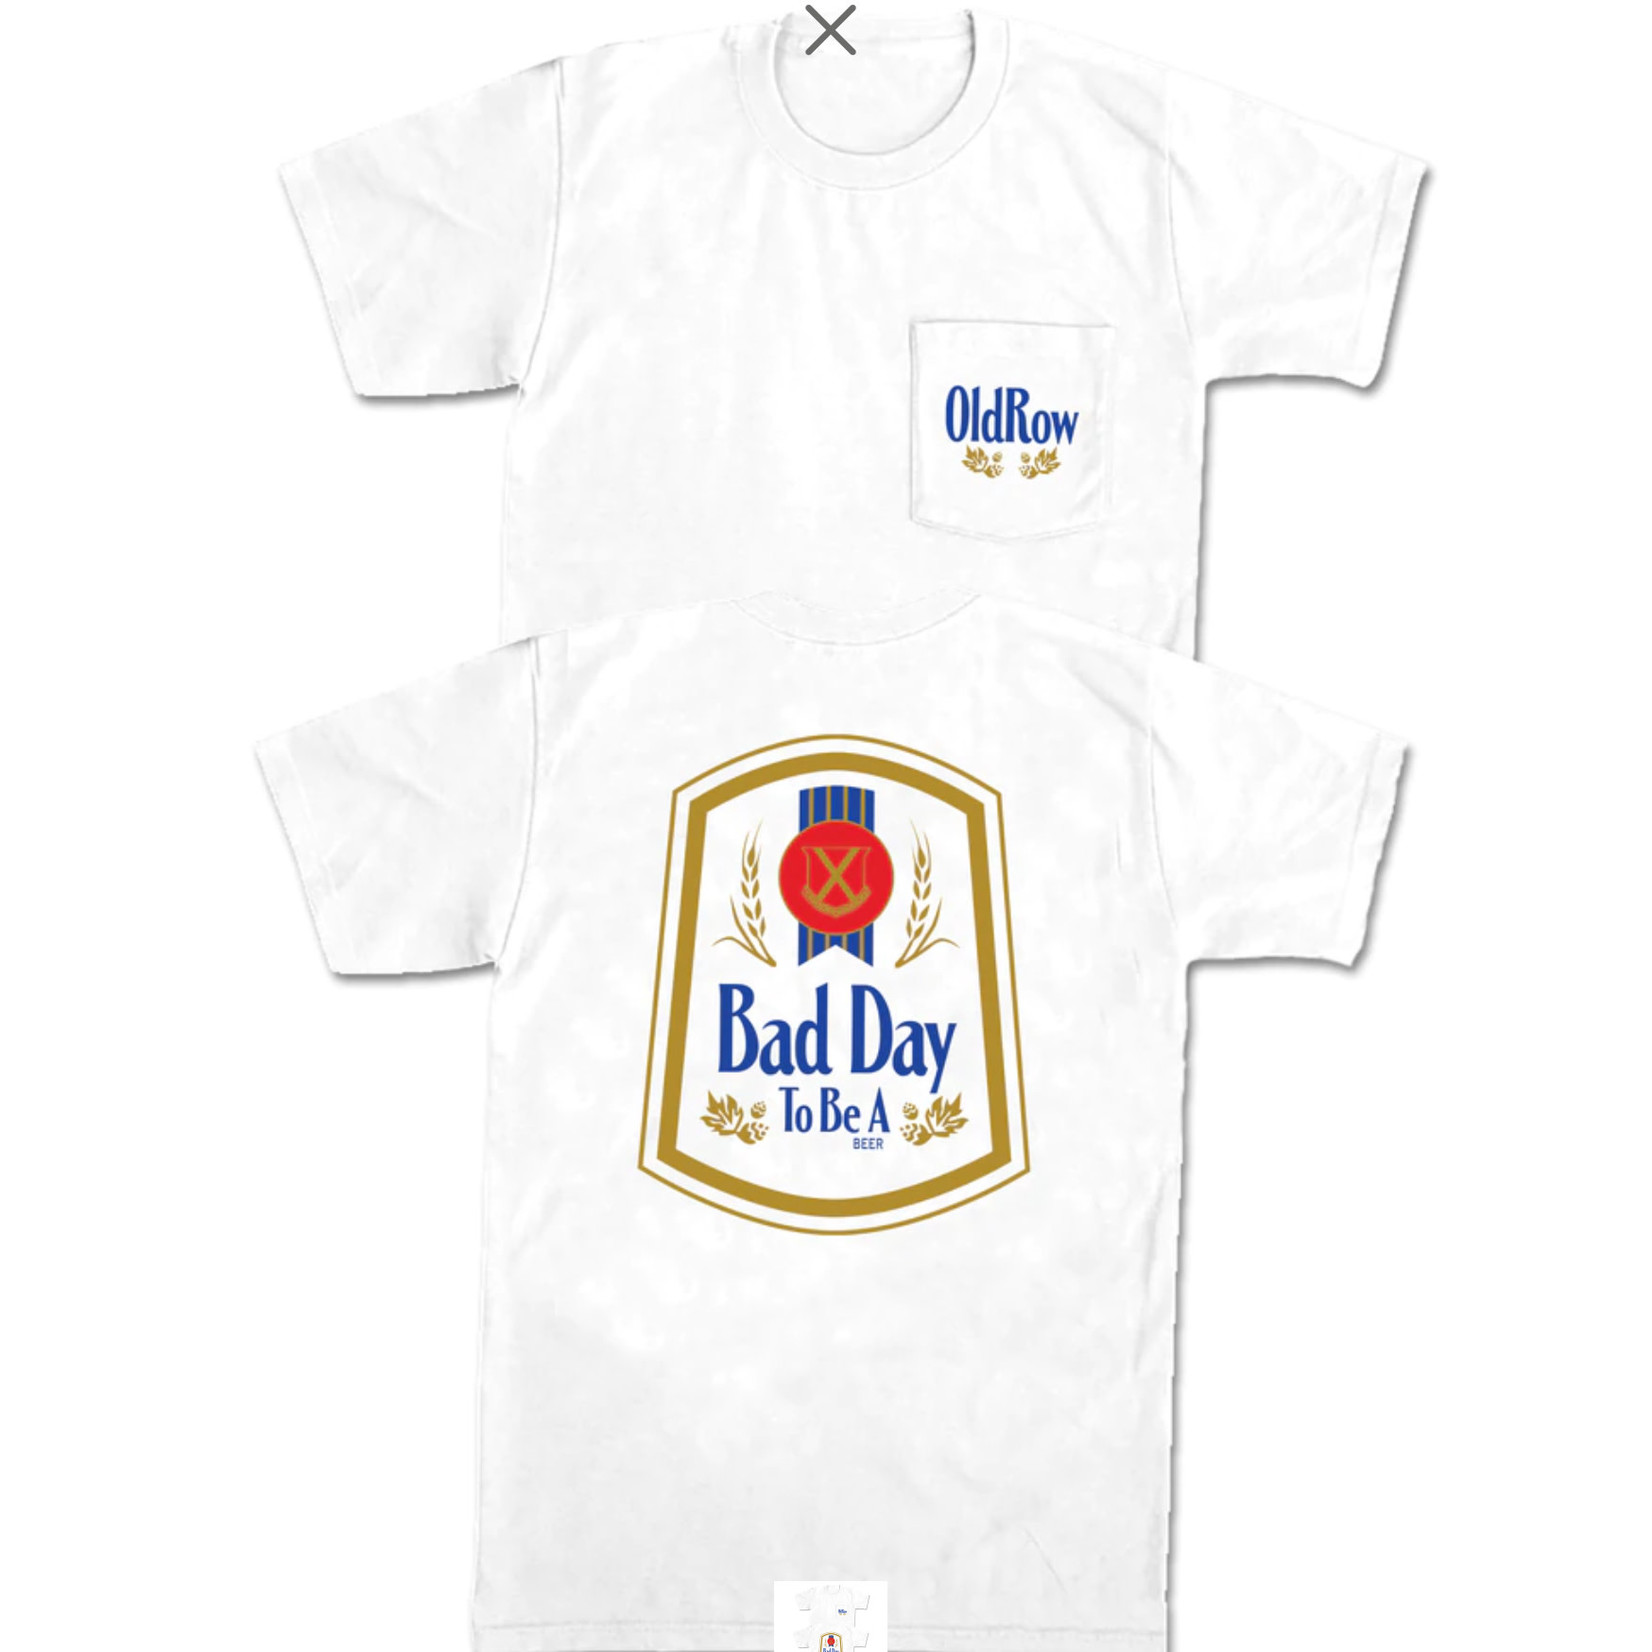 Old Row Bad Day to be a Beer Natty Pocket Tee-White- XL